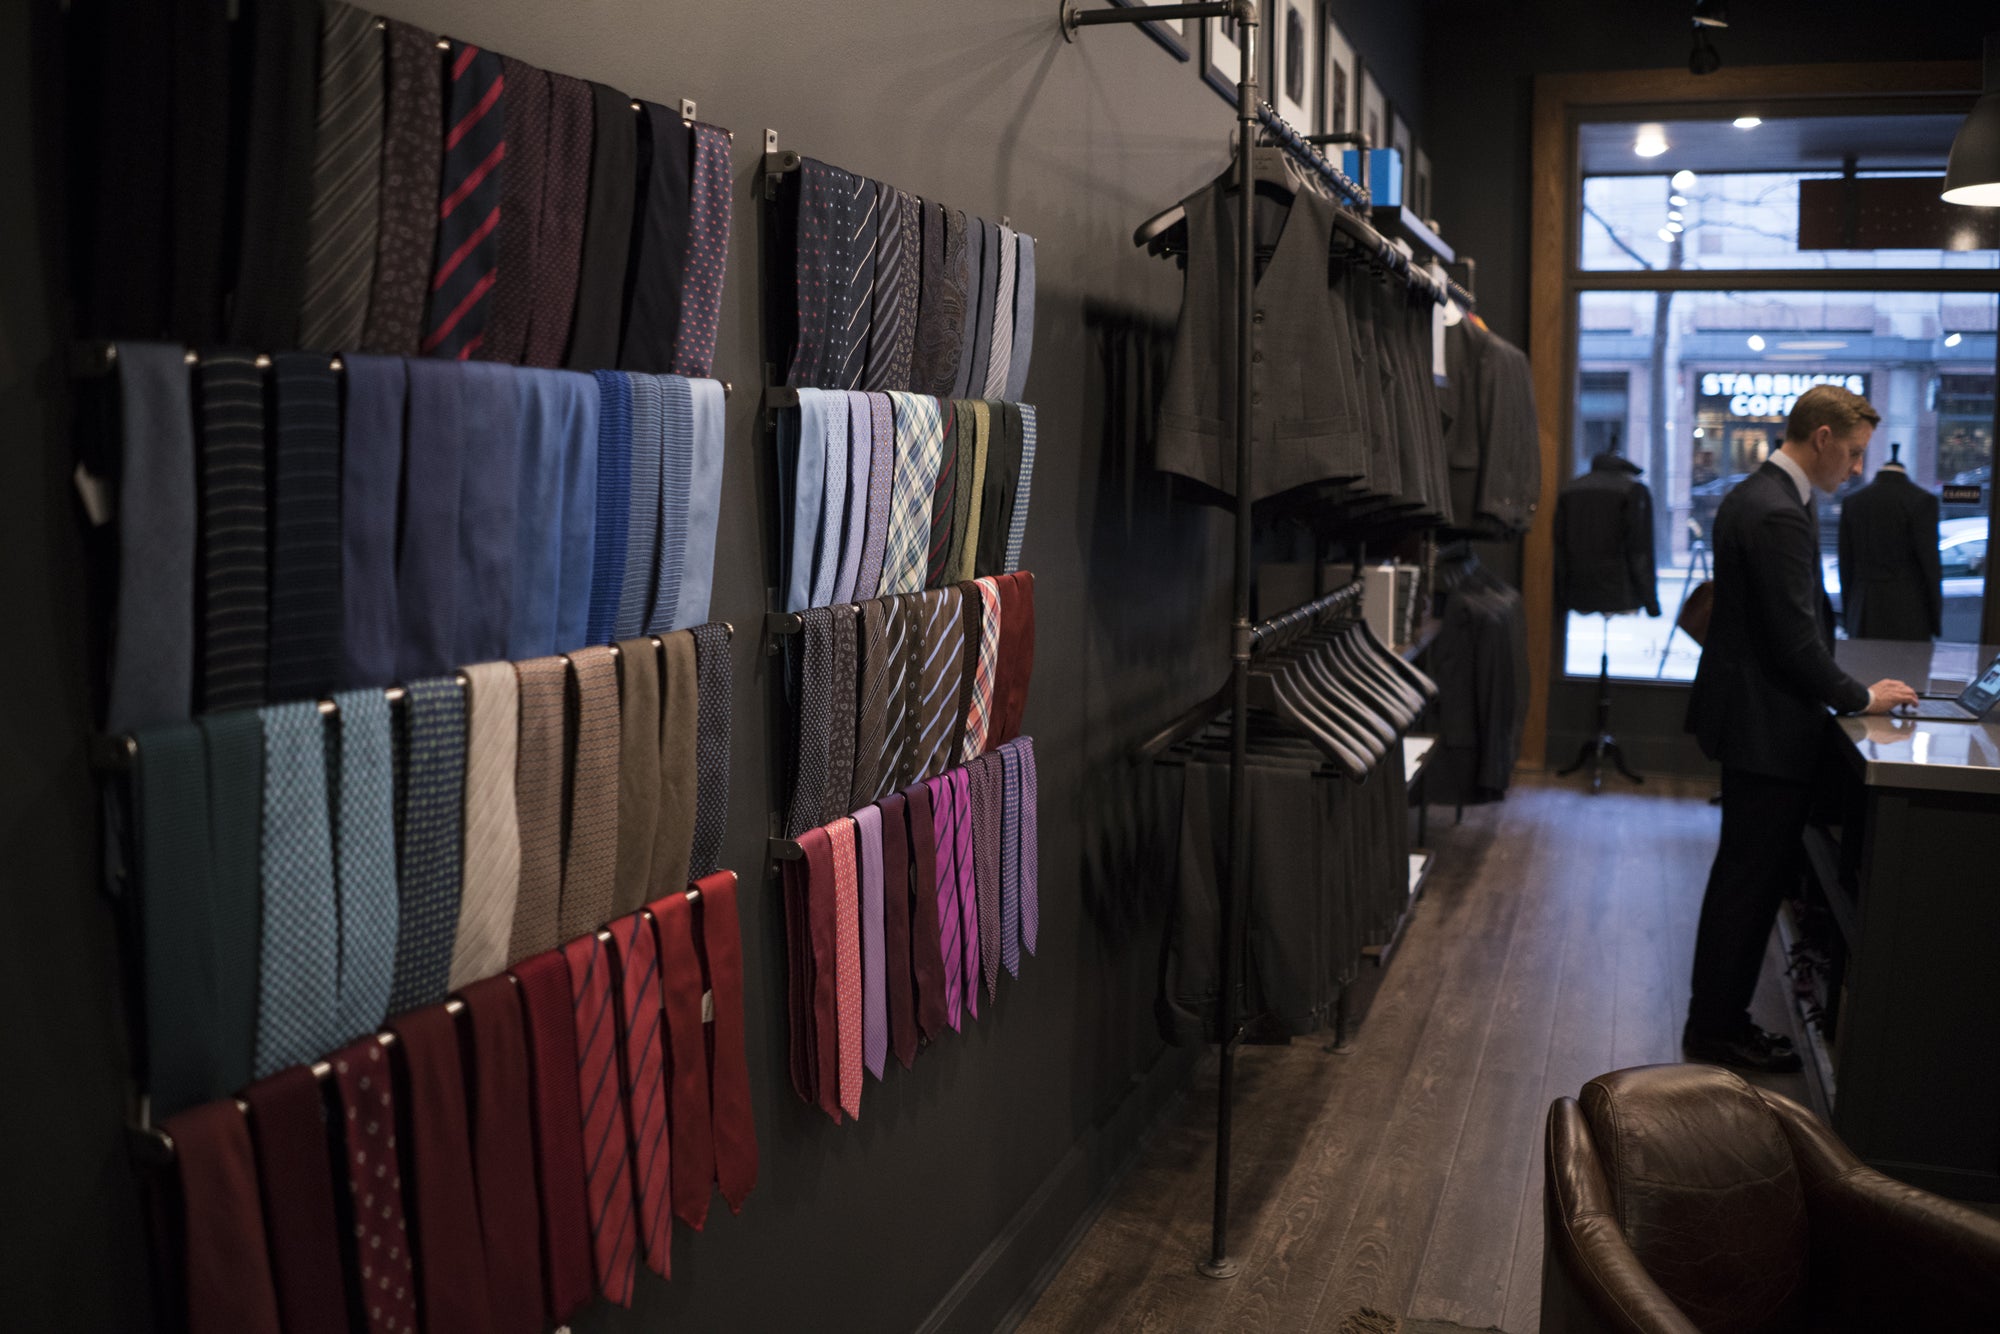 seattle shop with wall necktie display and suits hanging on racks 